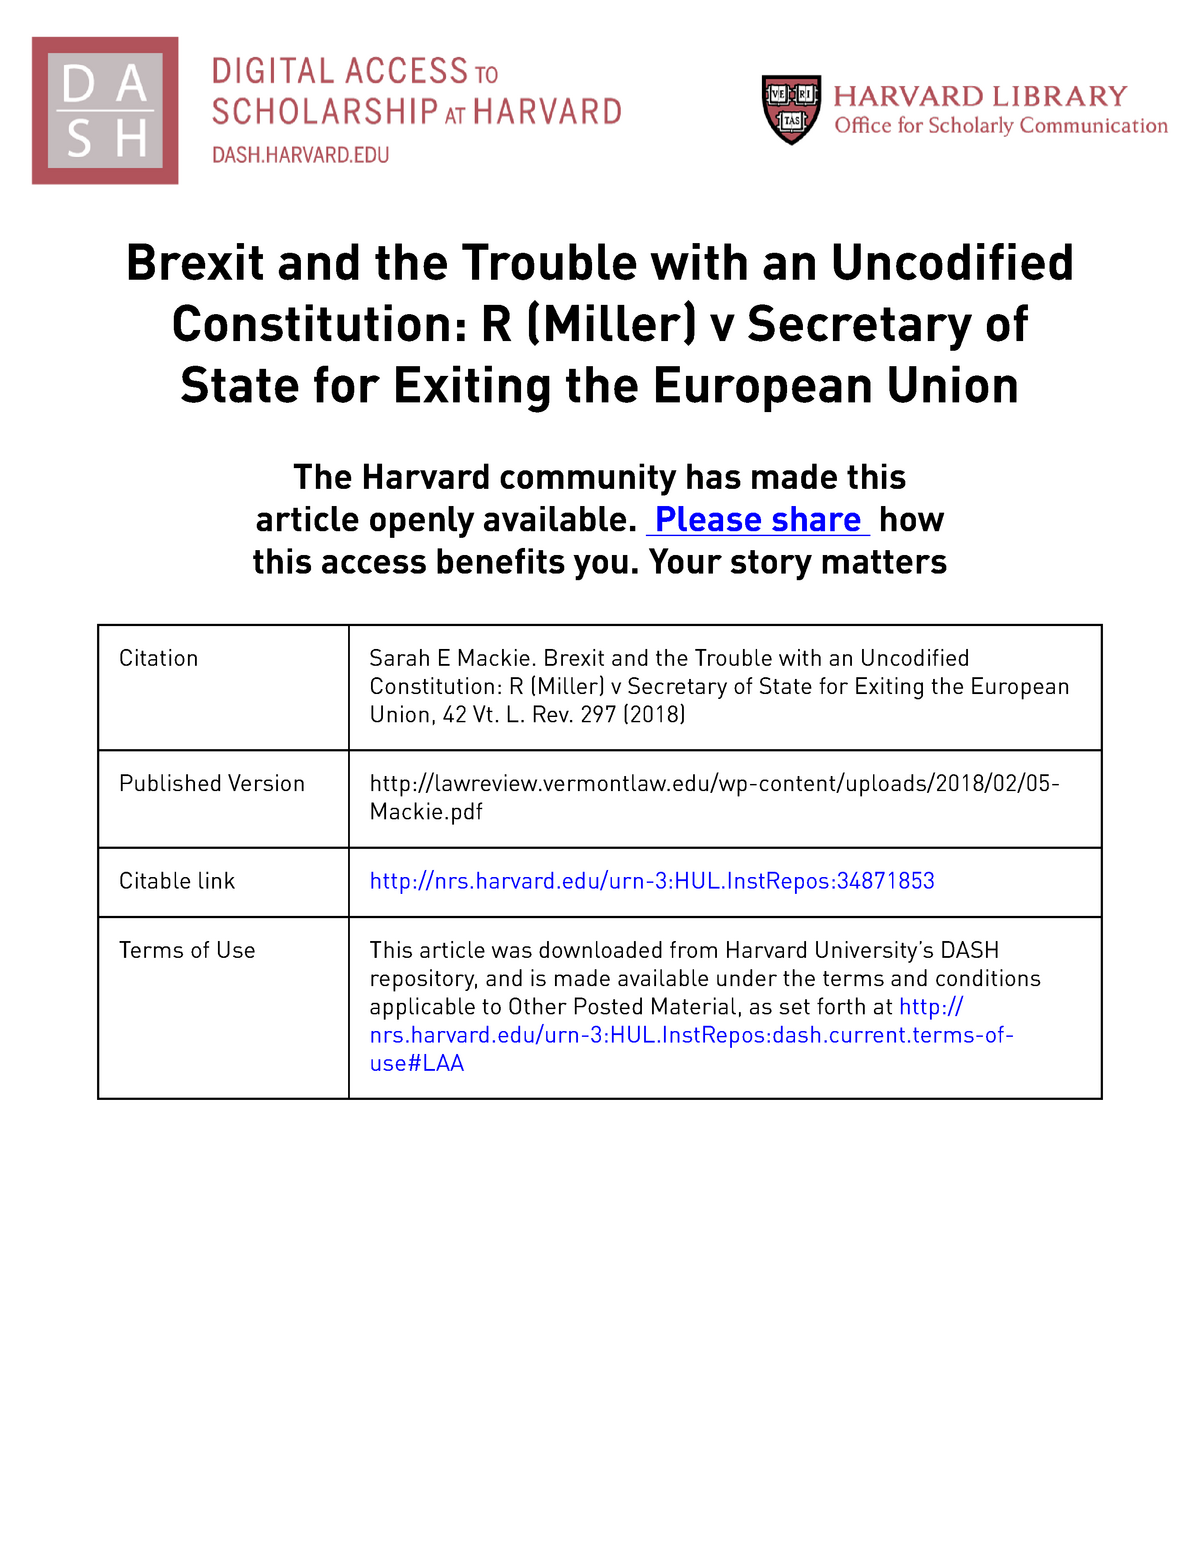 Brexit And The Trouble With An Uncodified Constitution 18 422 Vermont Law Review 297 Brexit And Studocu